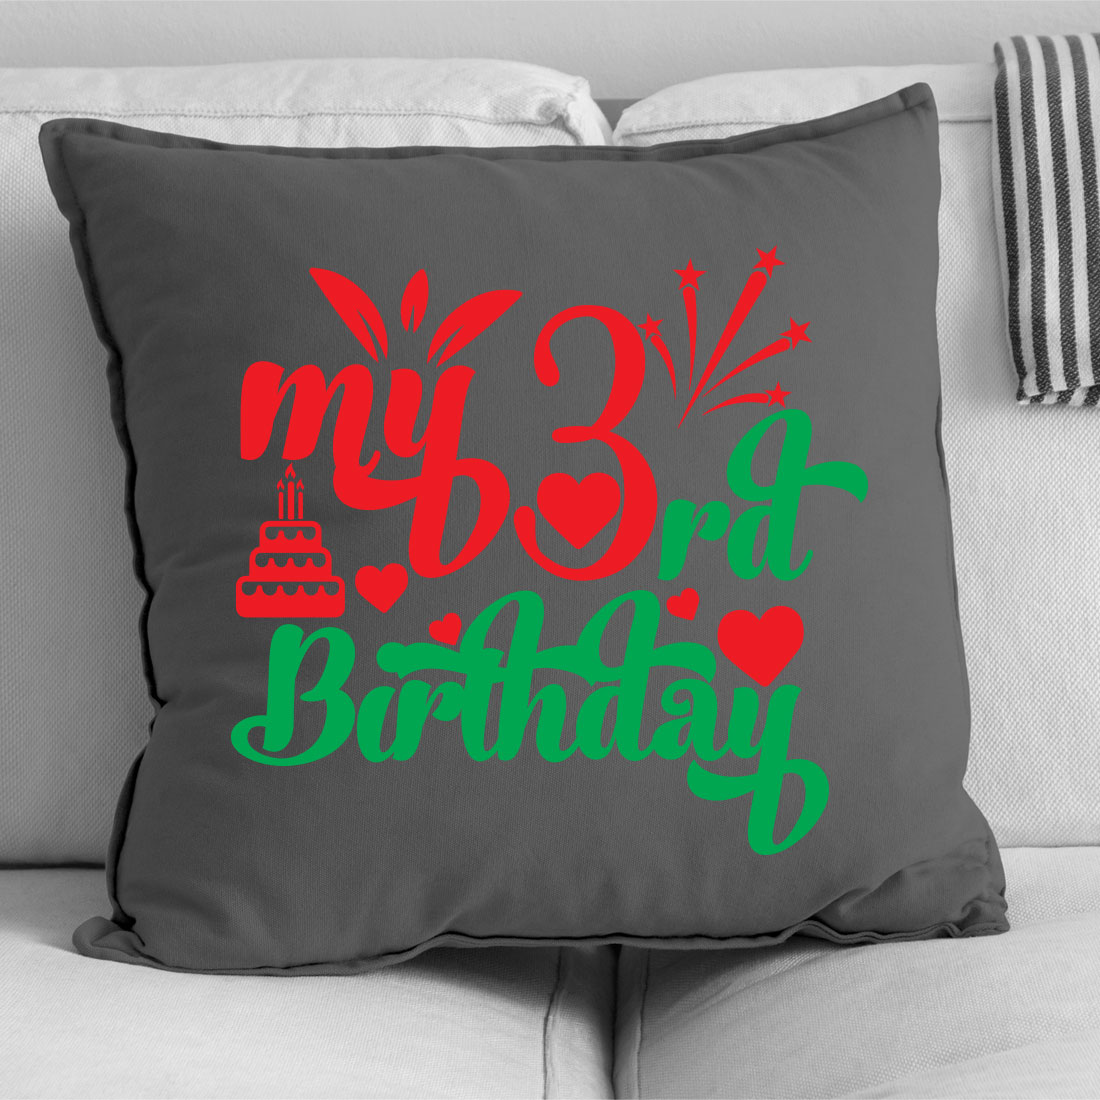 Gray pillow with a red and green design on it.